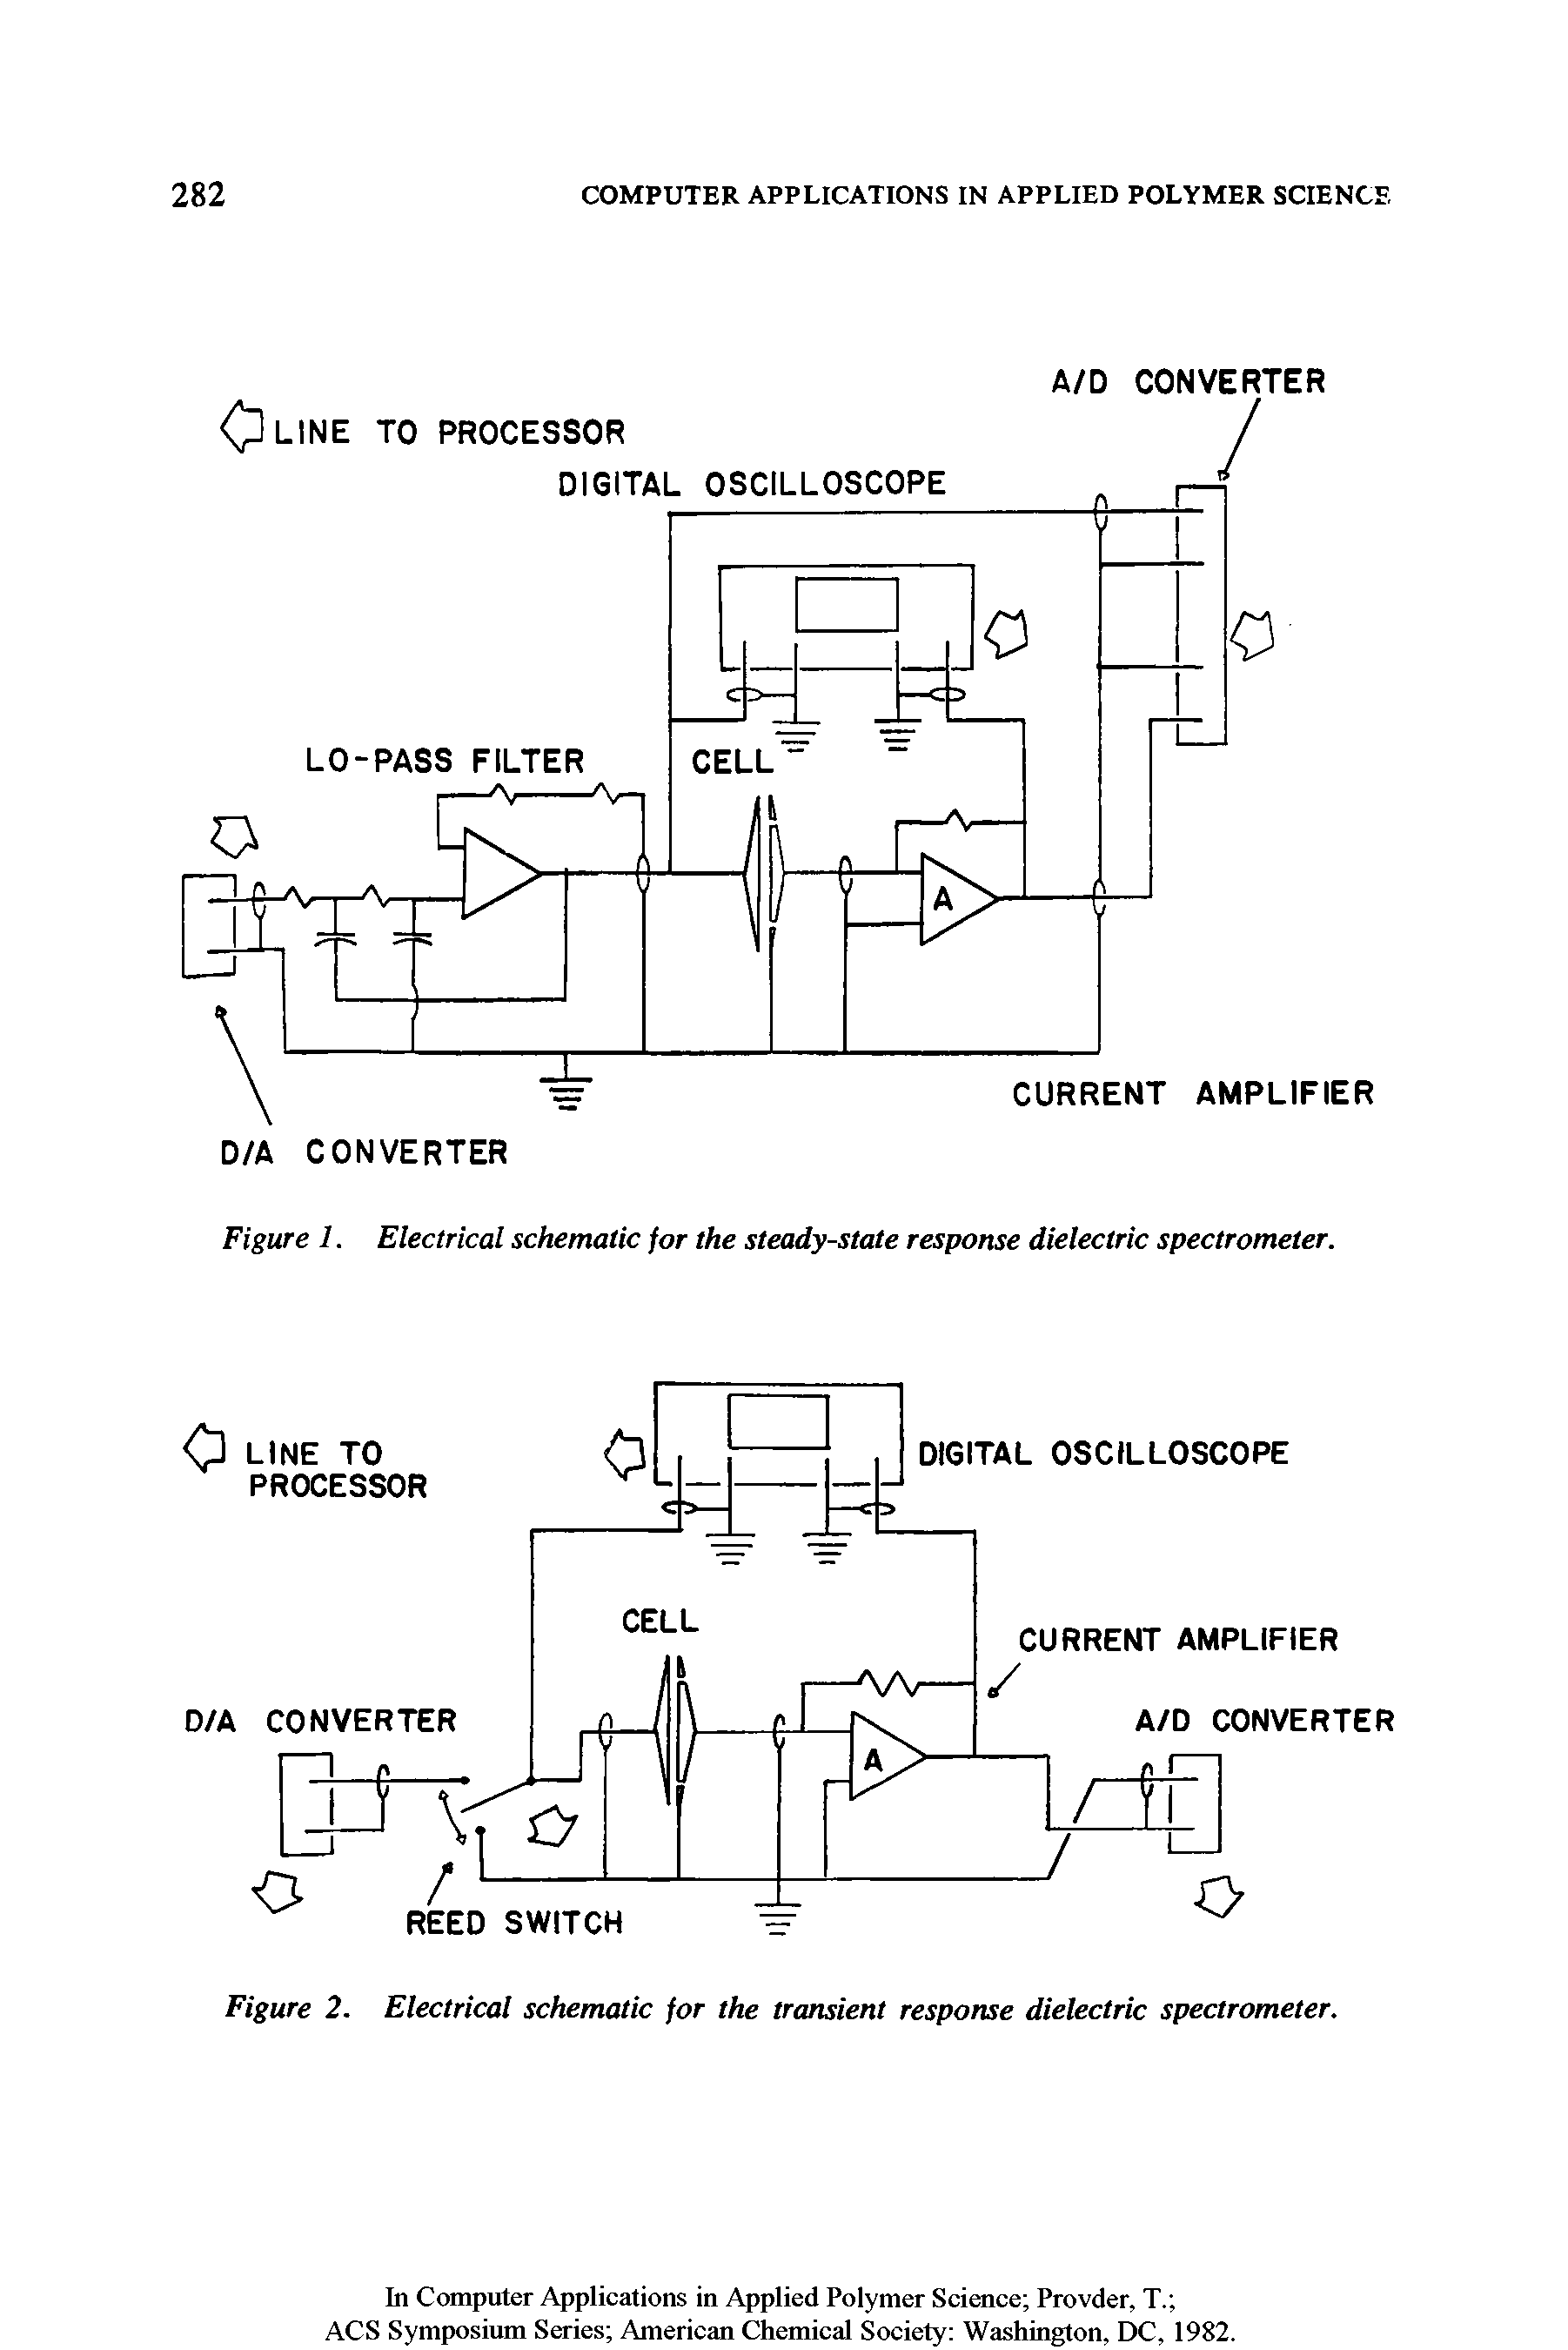 Figure 2. Electrical schematic for the transient response dielectric spectrometer.